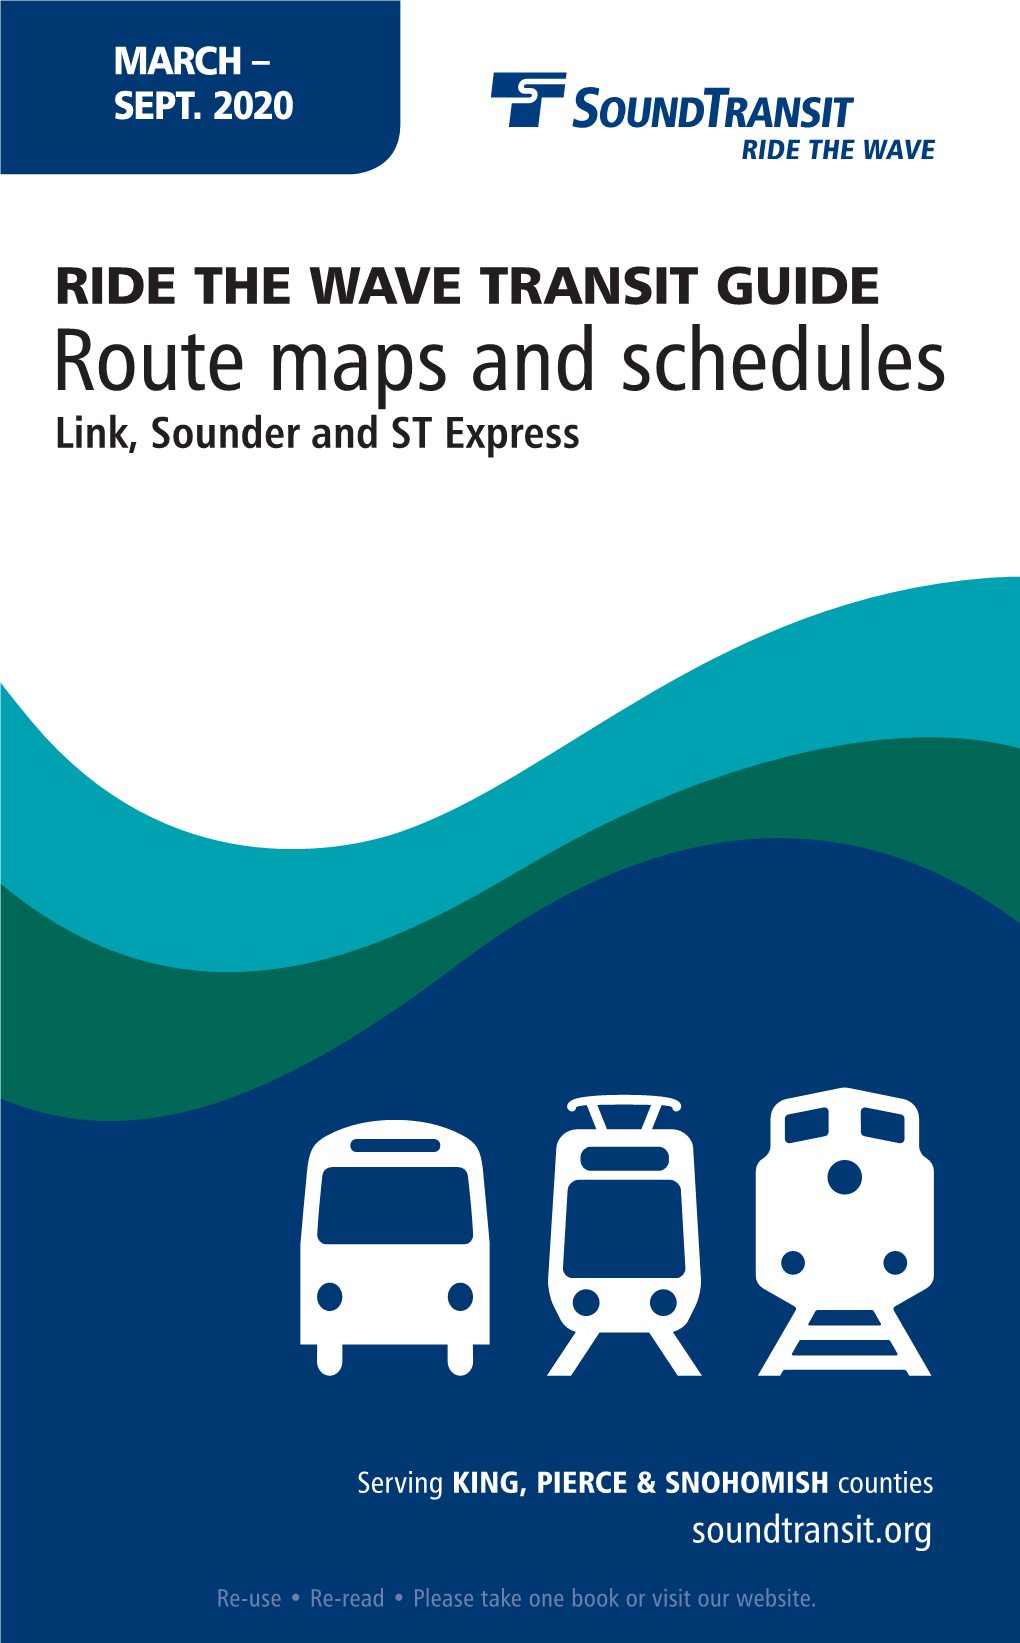 Ride the Wave Transit Guide, March 2020